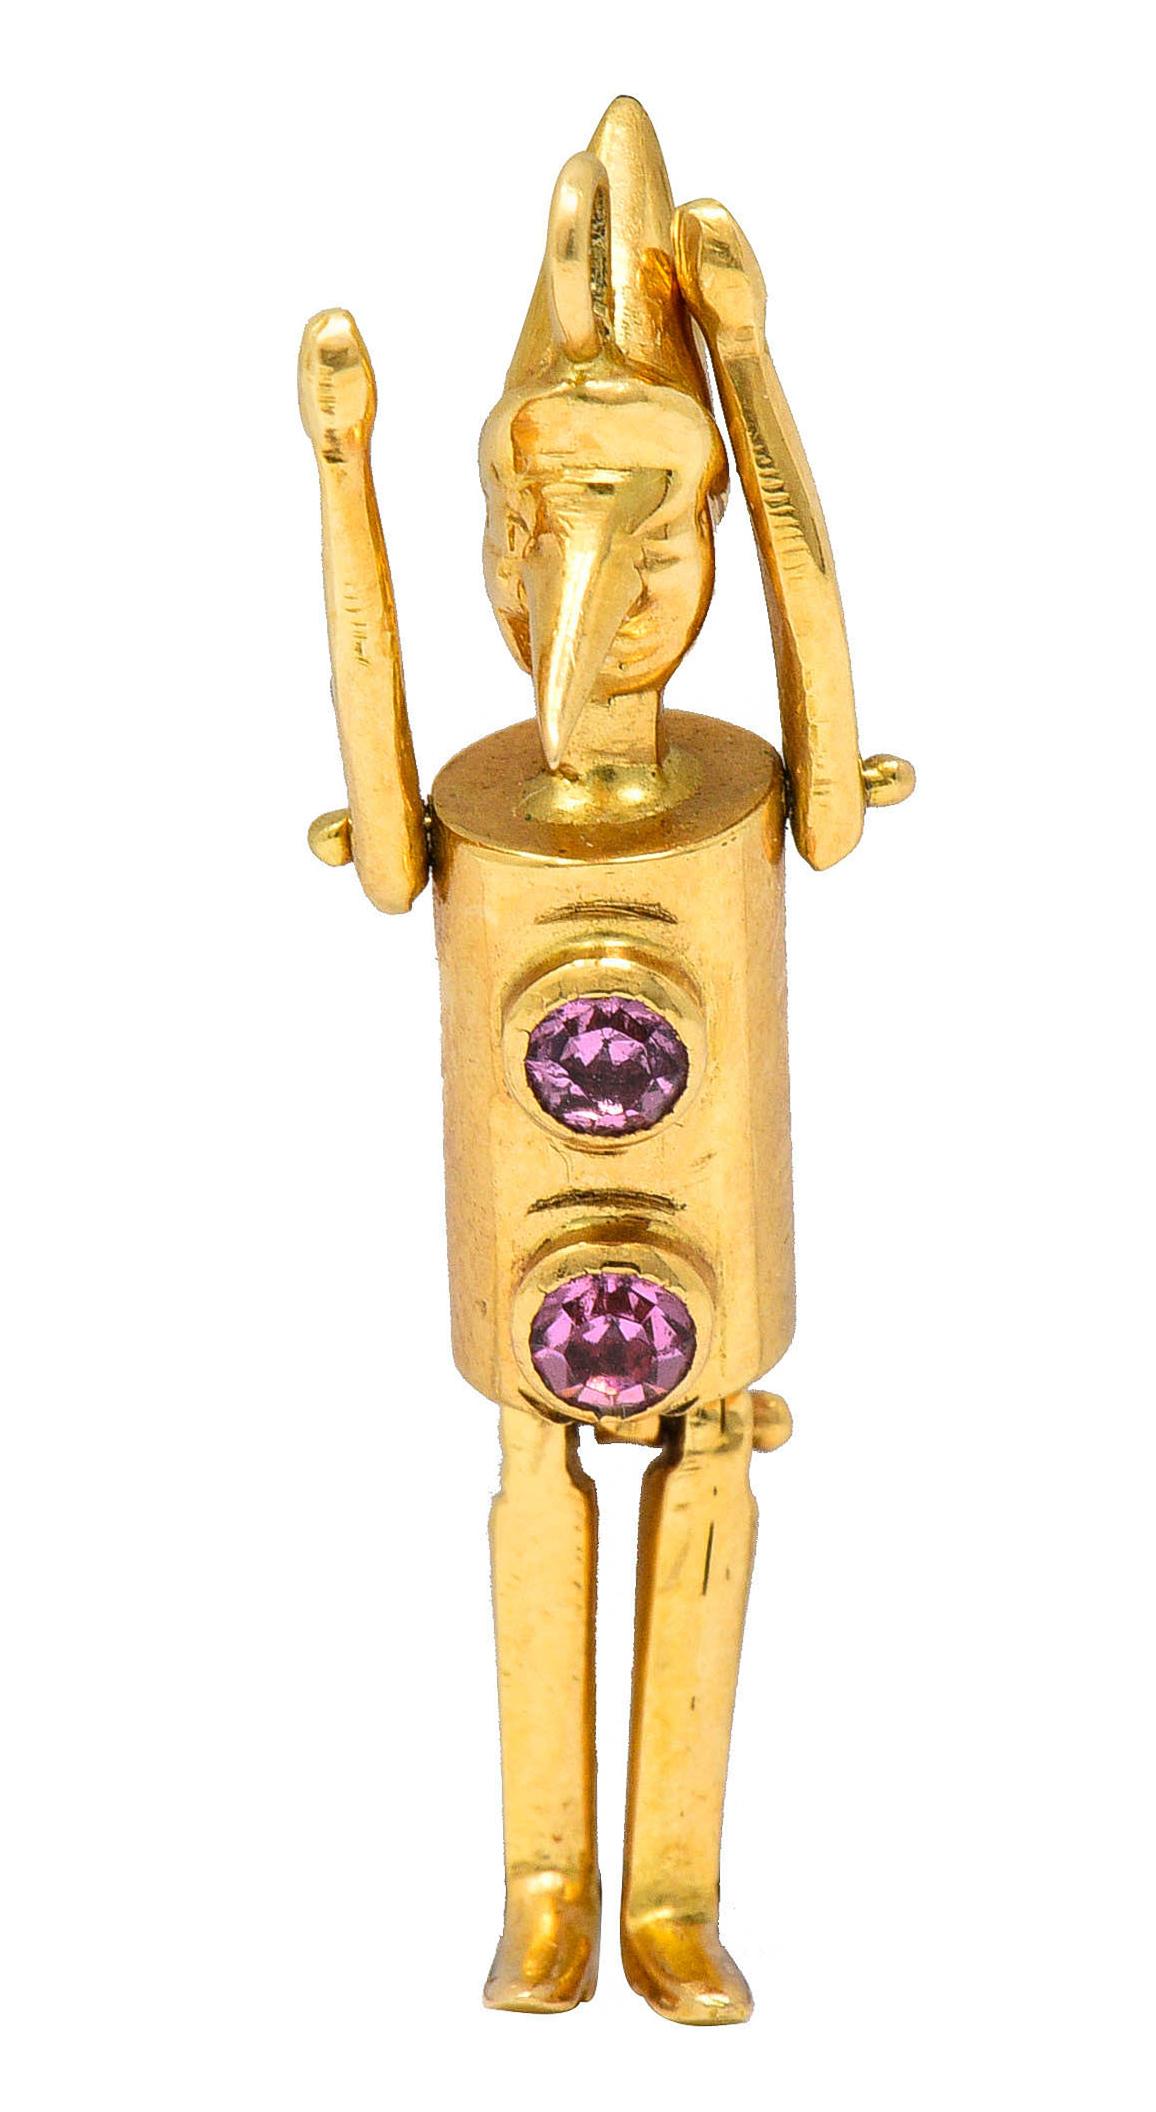 Charm is designed as Pinocchio with a polished gold finish

Centering two bezel set round cut pink sapphire weighing approximately 0.30 carat

With articulated arms and legs then topped by jump ring bale

Tested as 18 karat gold

Circa: